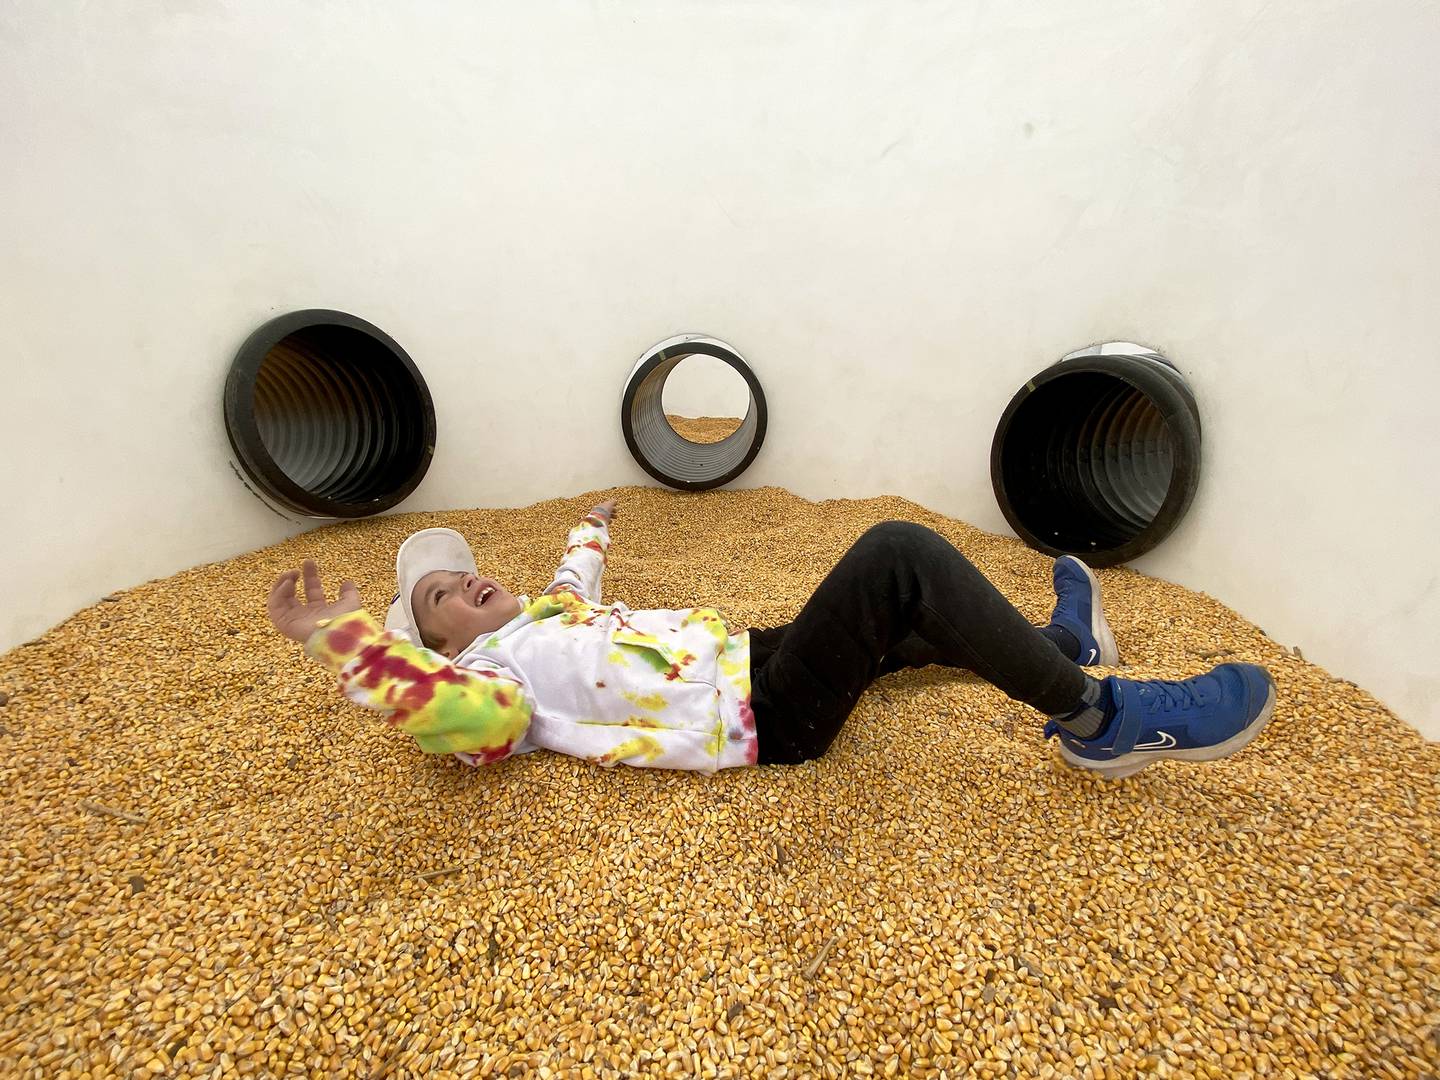 Boone Finley plays in a corn bin made from a water storage tank on Sept. 23, 2022, at Heap's Giant Pumpkin Farm, 4853 Route 52, in Minooka.